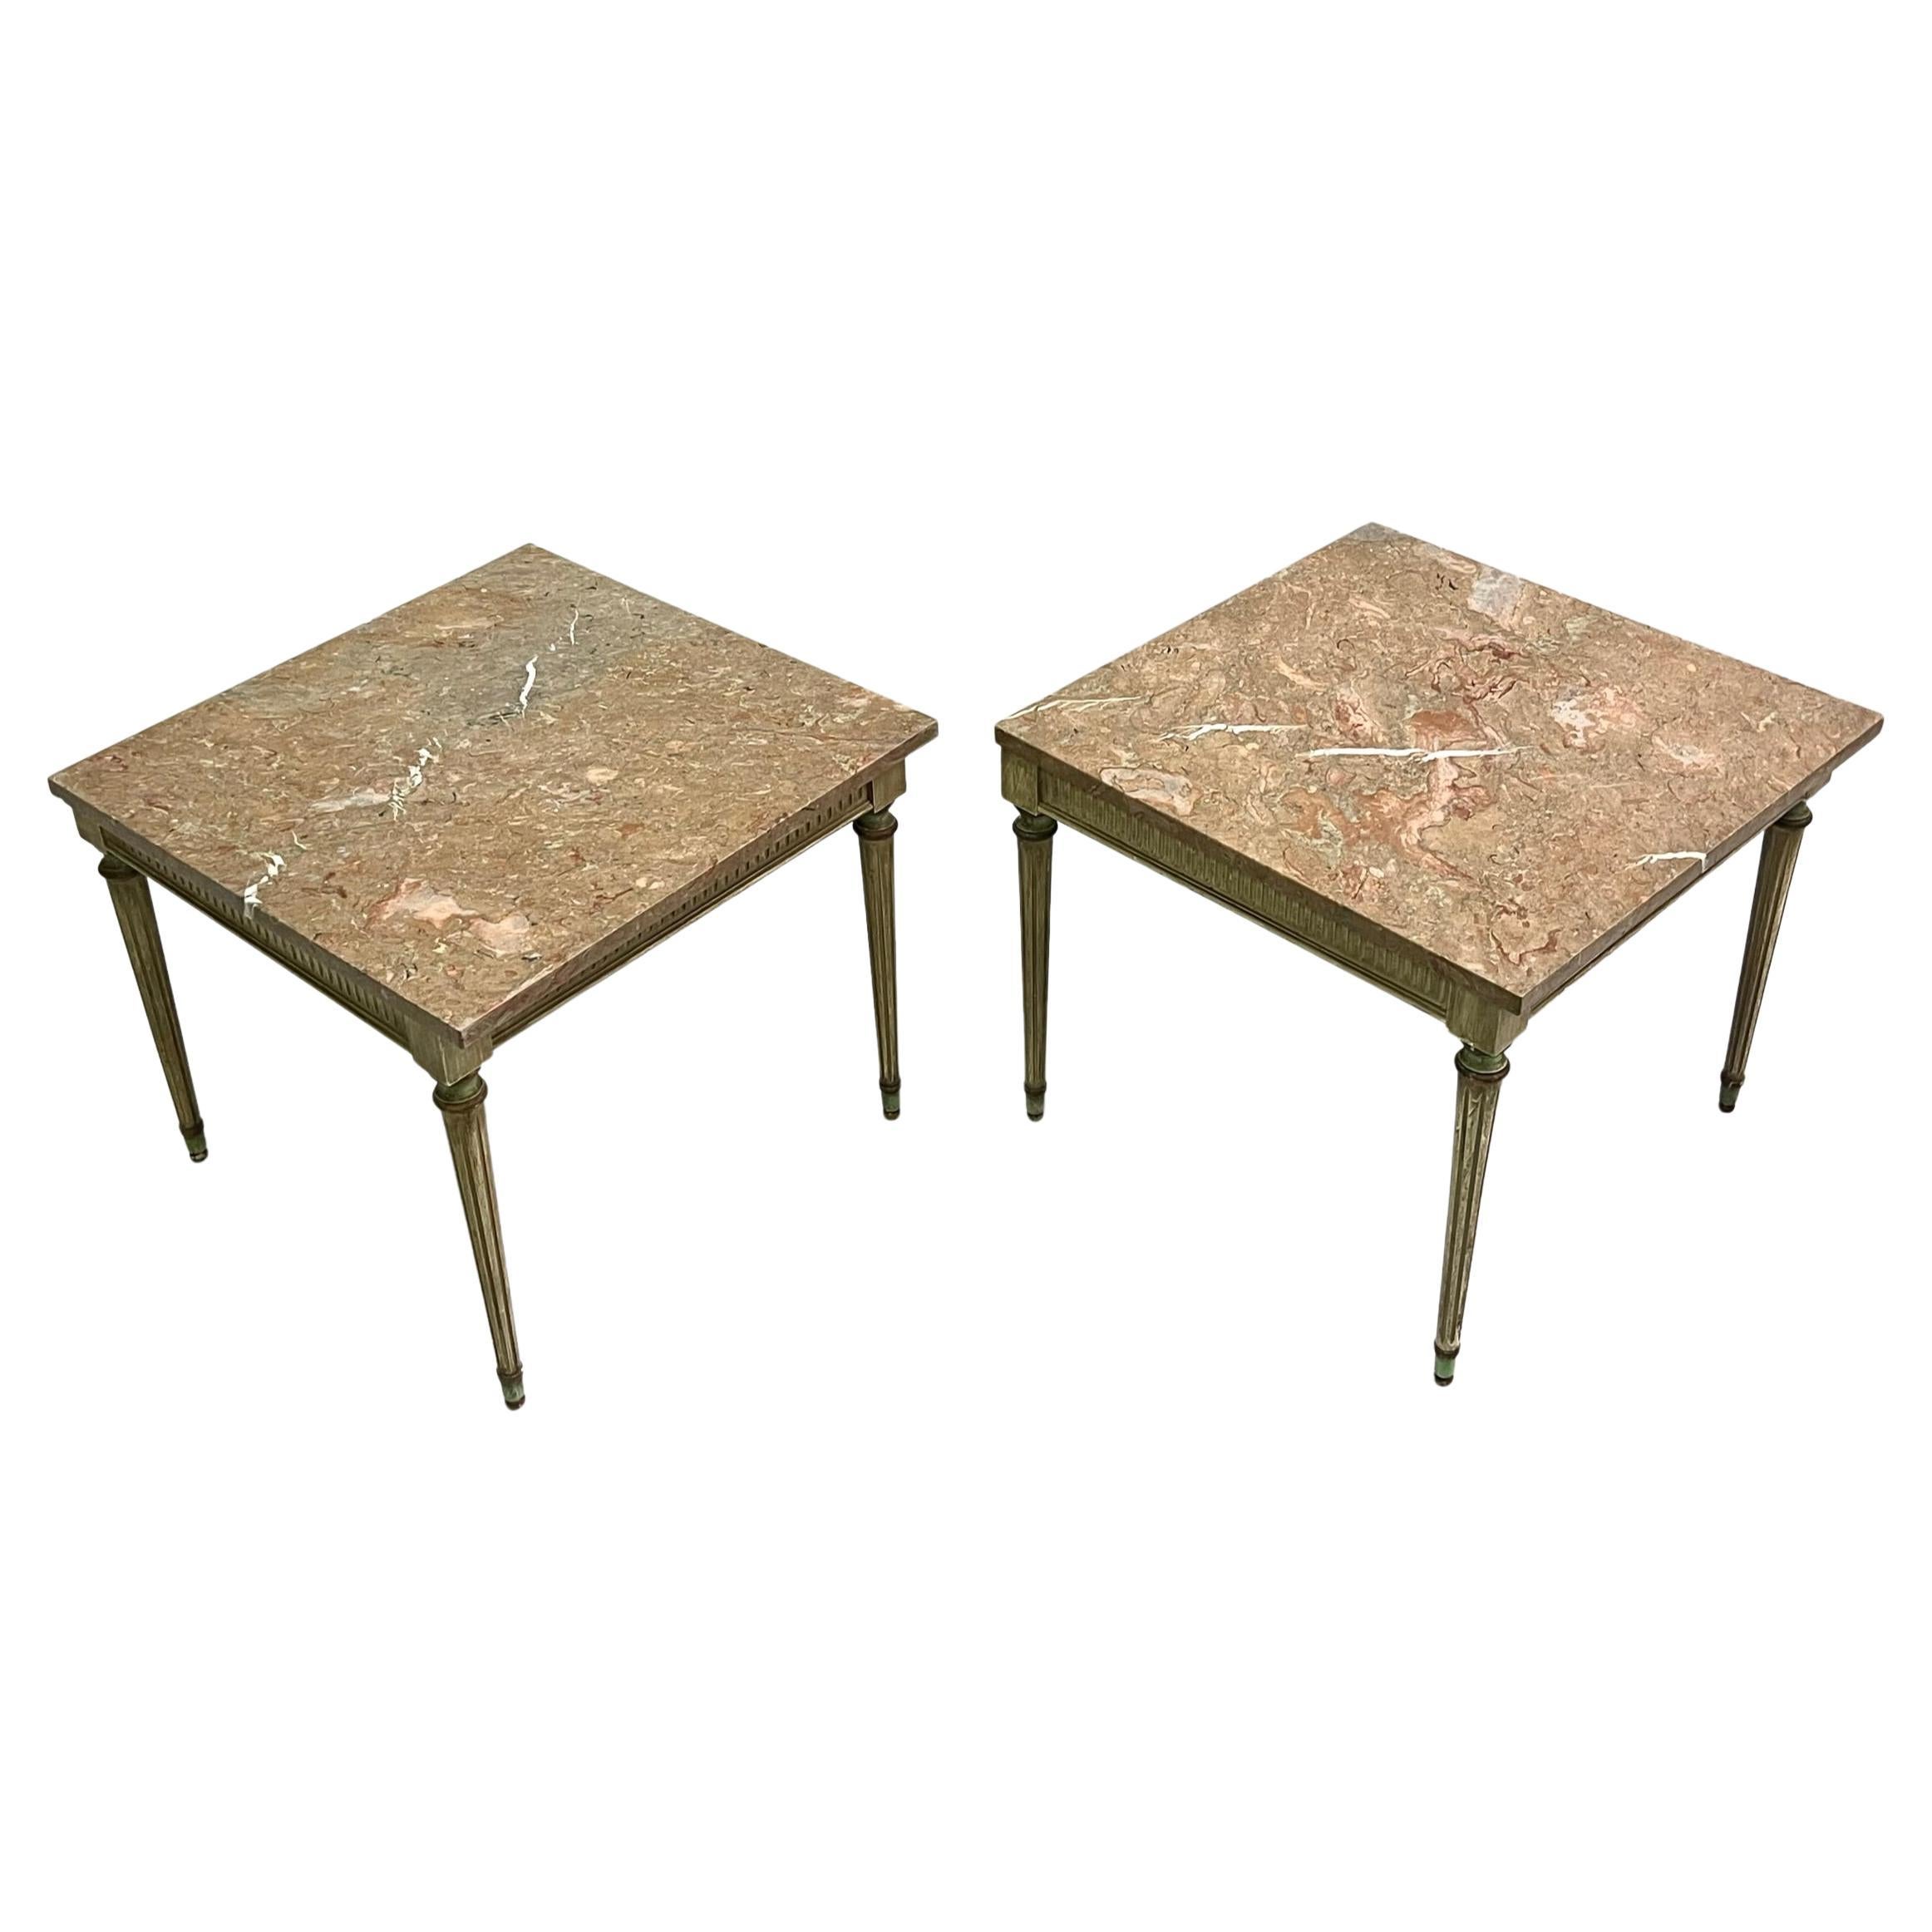 Pair French Modern Neoclassical Painted Wood & Marble Side Tables, Maison Jansen For Sale